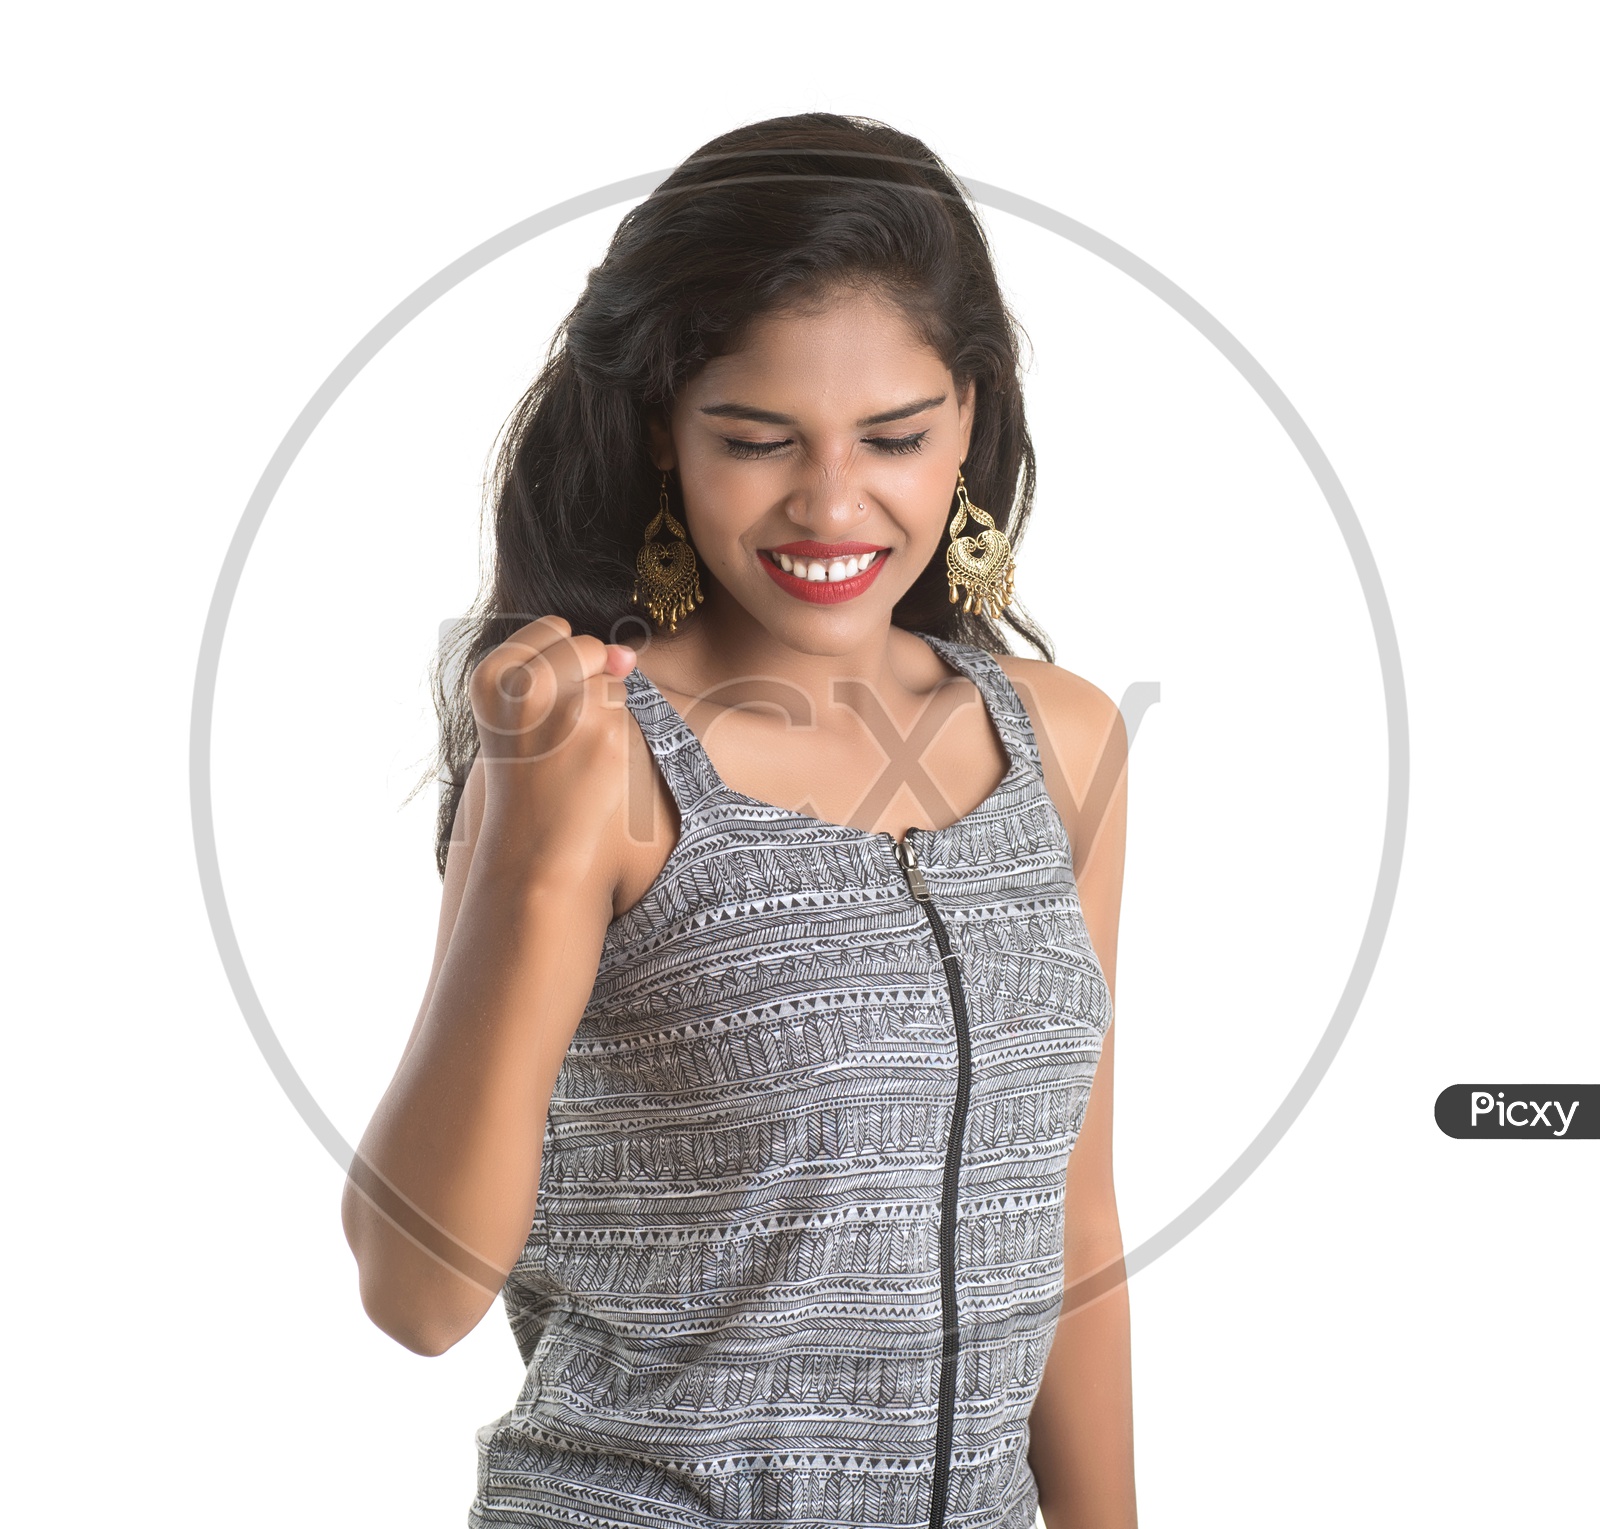 Pretty Young Girl  Showing Gestures and With Happy Smile On Face  Posing On an Isolated White Background